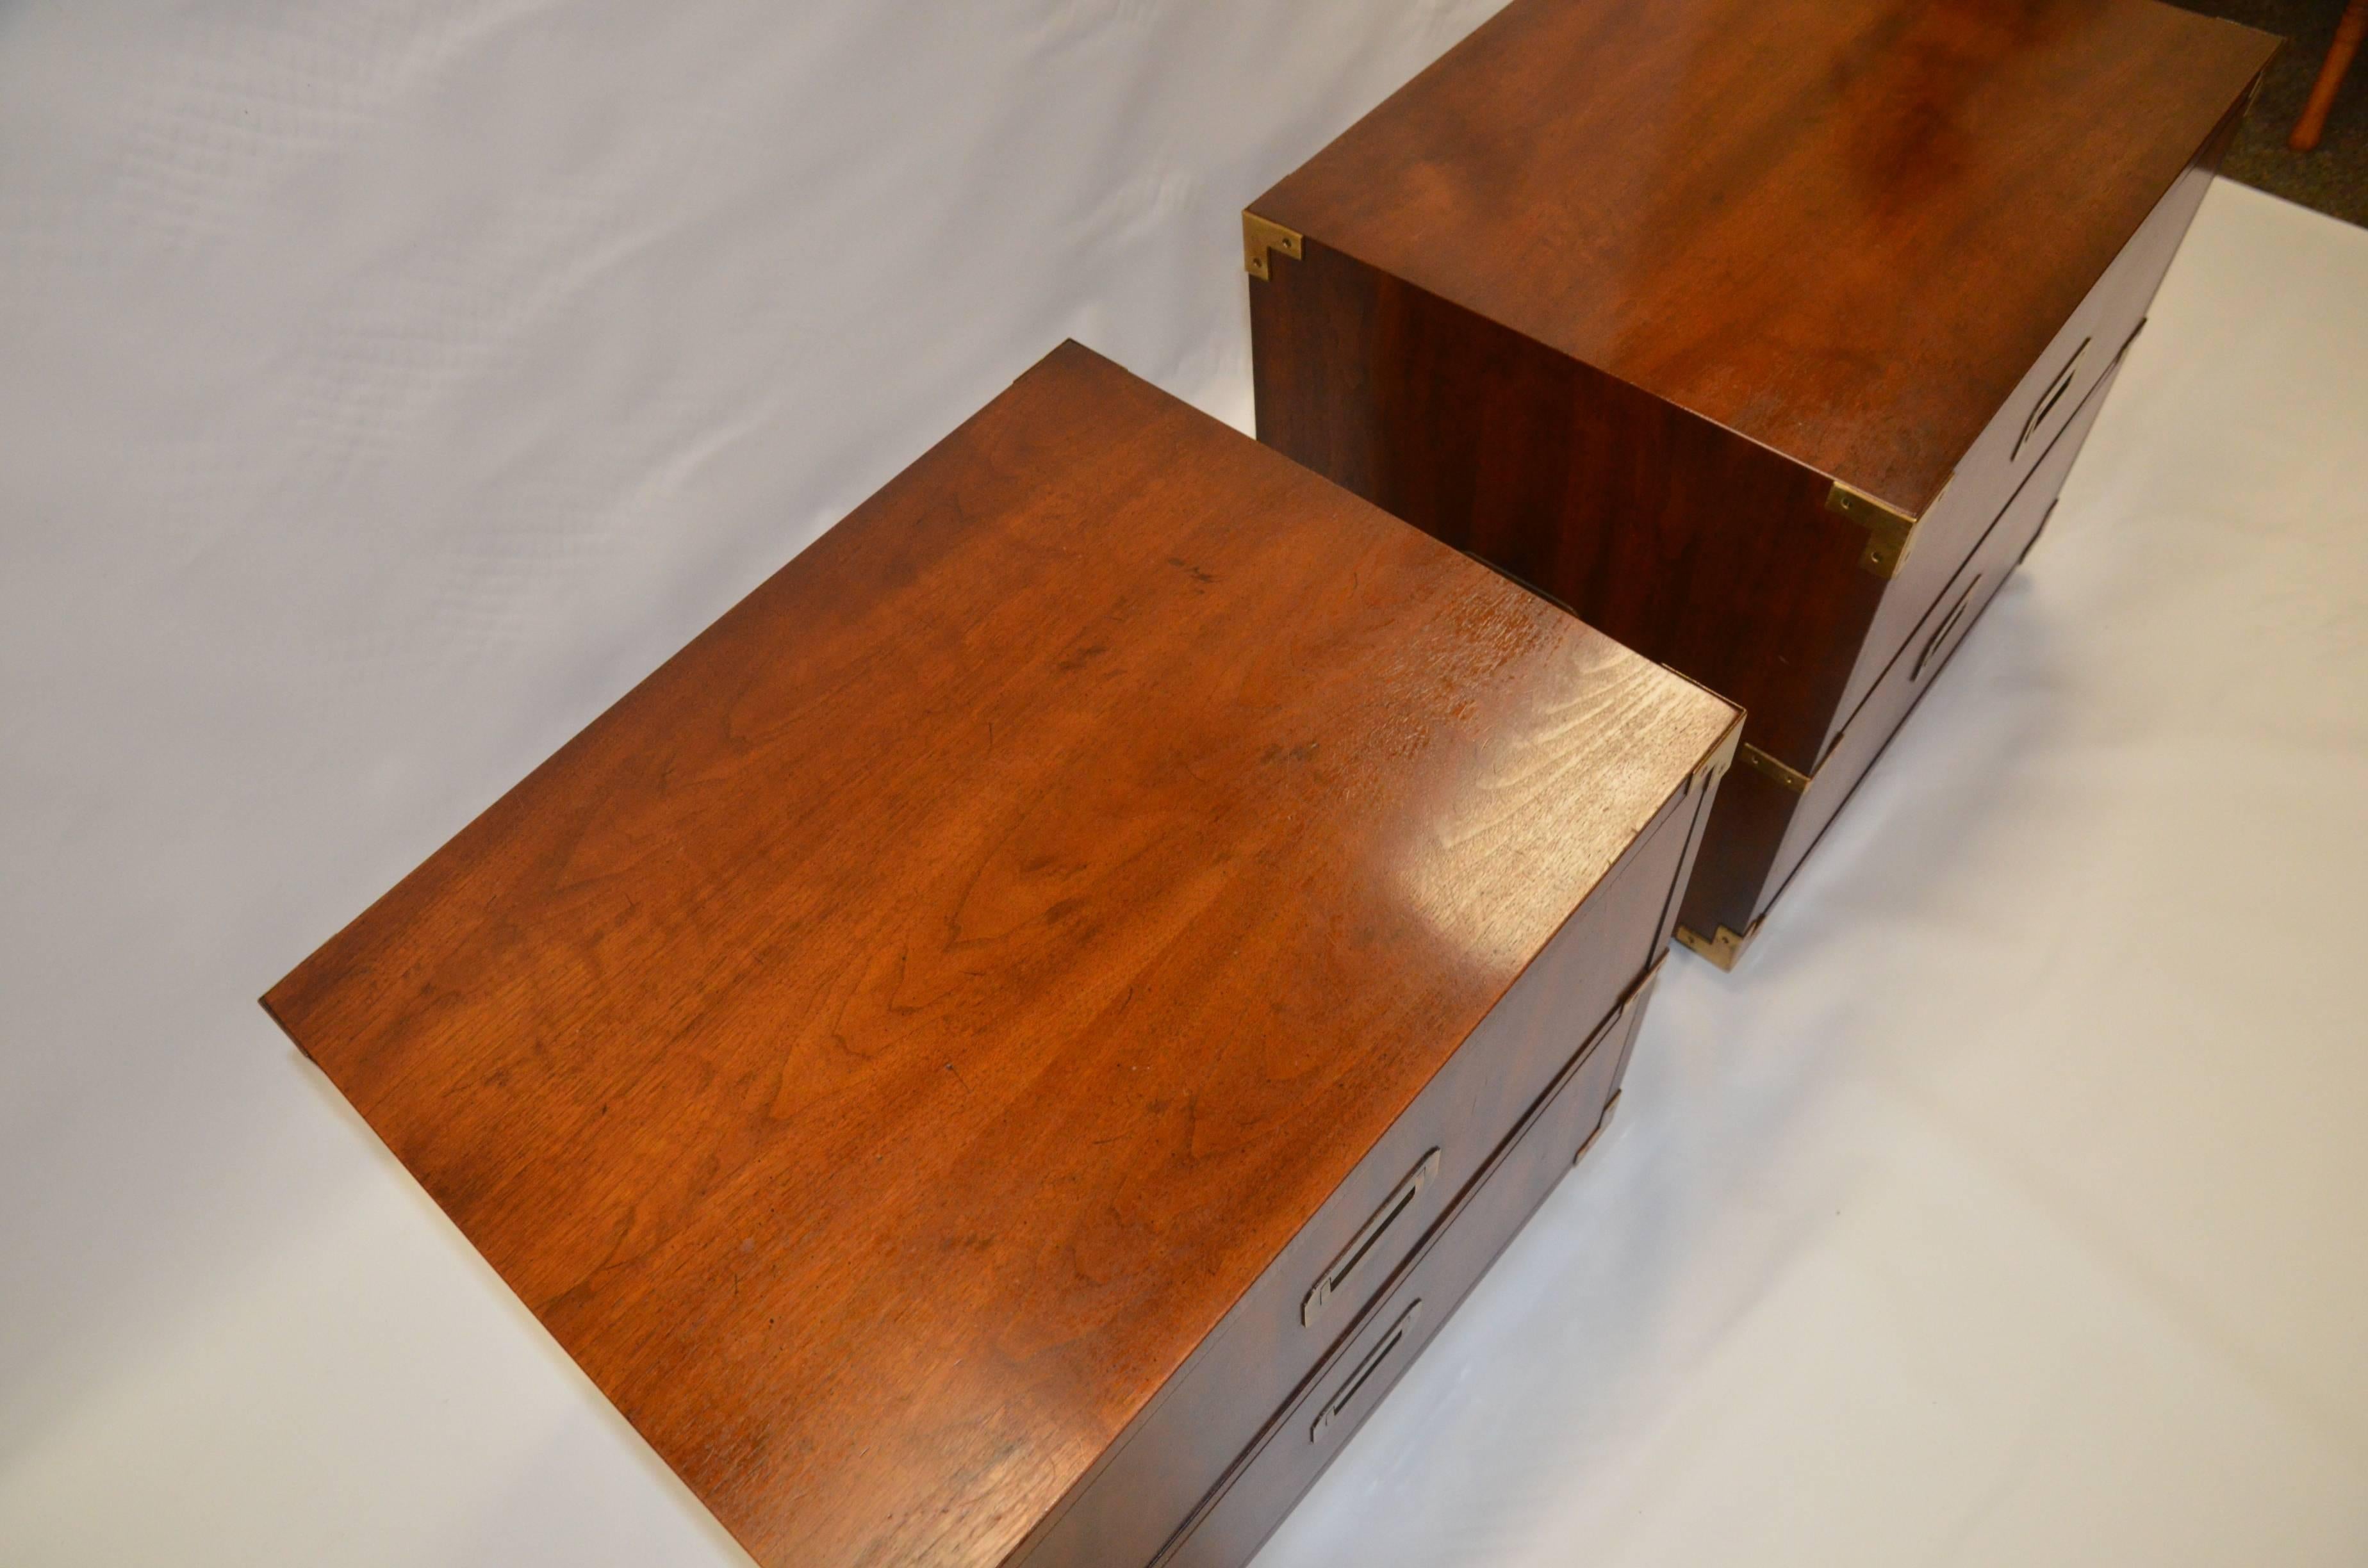 Pair of vintage Campaign style nightstands by Henredon. This pair is crafted out of walnut and feature recessed brass pulls and brass corner hardware. Each nightstand has two deep dove-tailed drawers for storage. They sit upon block feet and feature